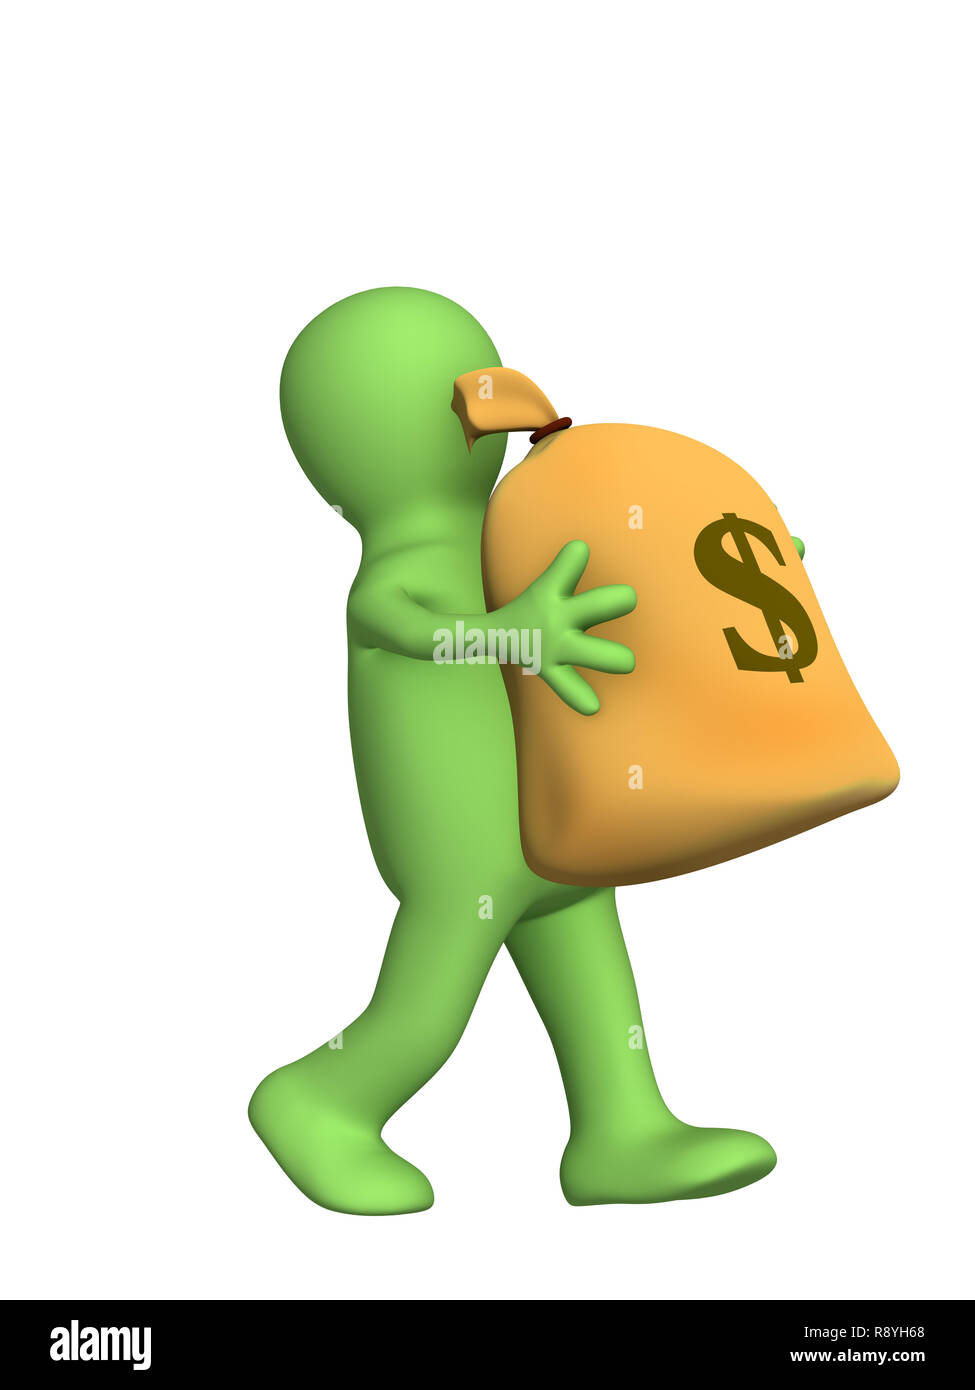 Shadow Of Robbers Hand On Yellow Wall Trying To Steal Leather Wallet From  Persons Hand Pickpocket Silhouette Concept Of Financial Crime Tax Burden  Unexpected Expenses Stock Photo - Download Image Now - iStock